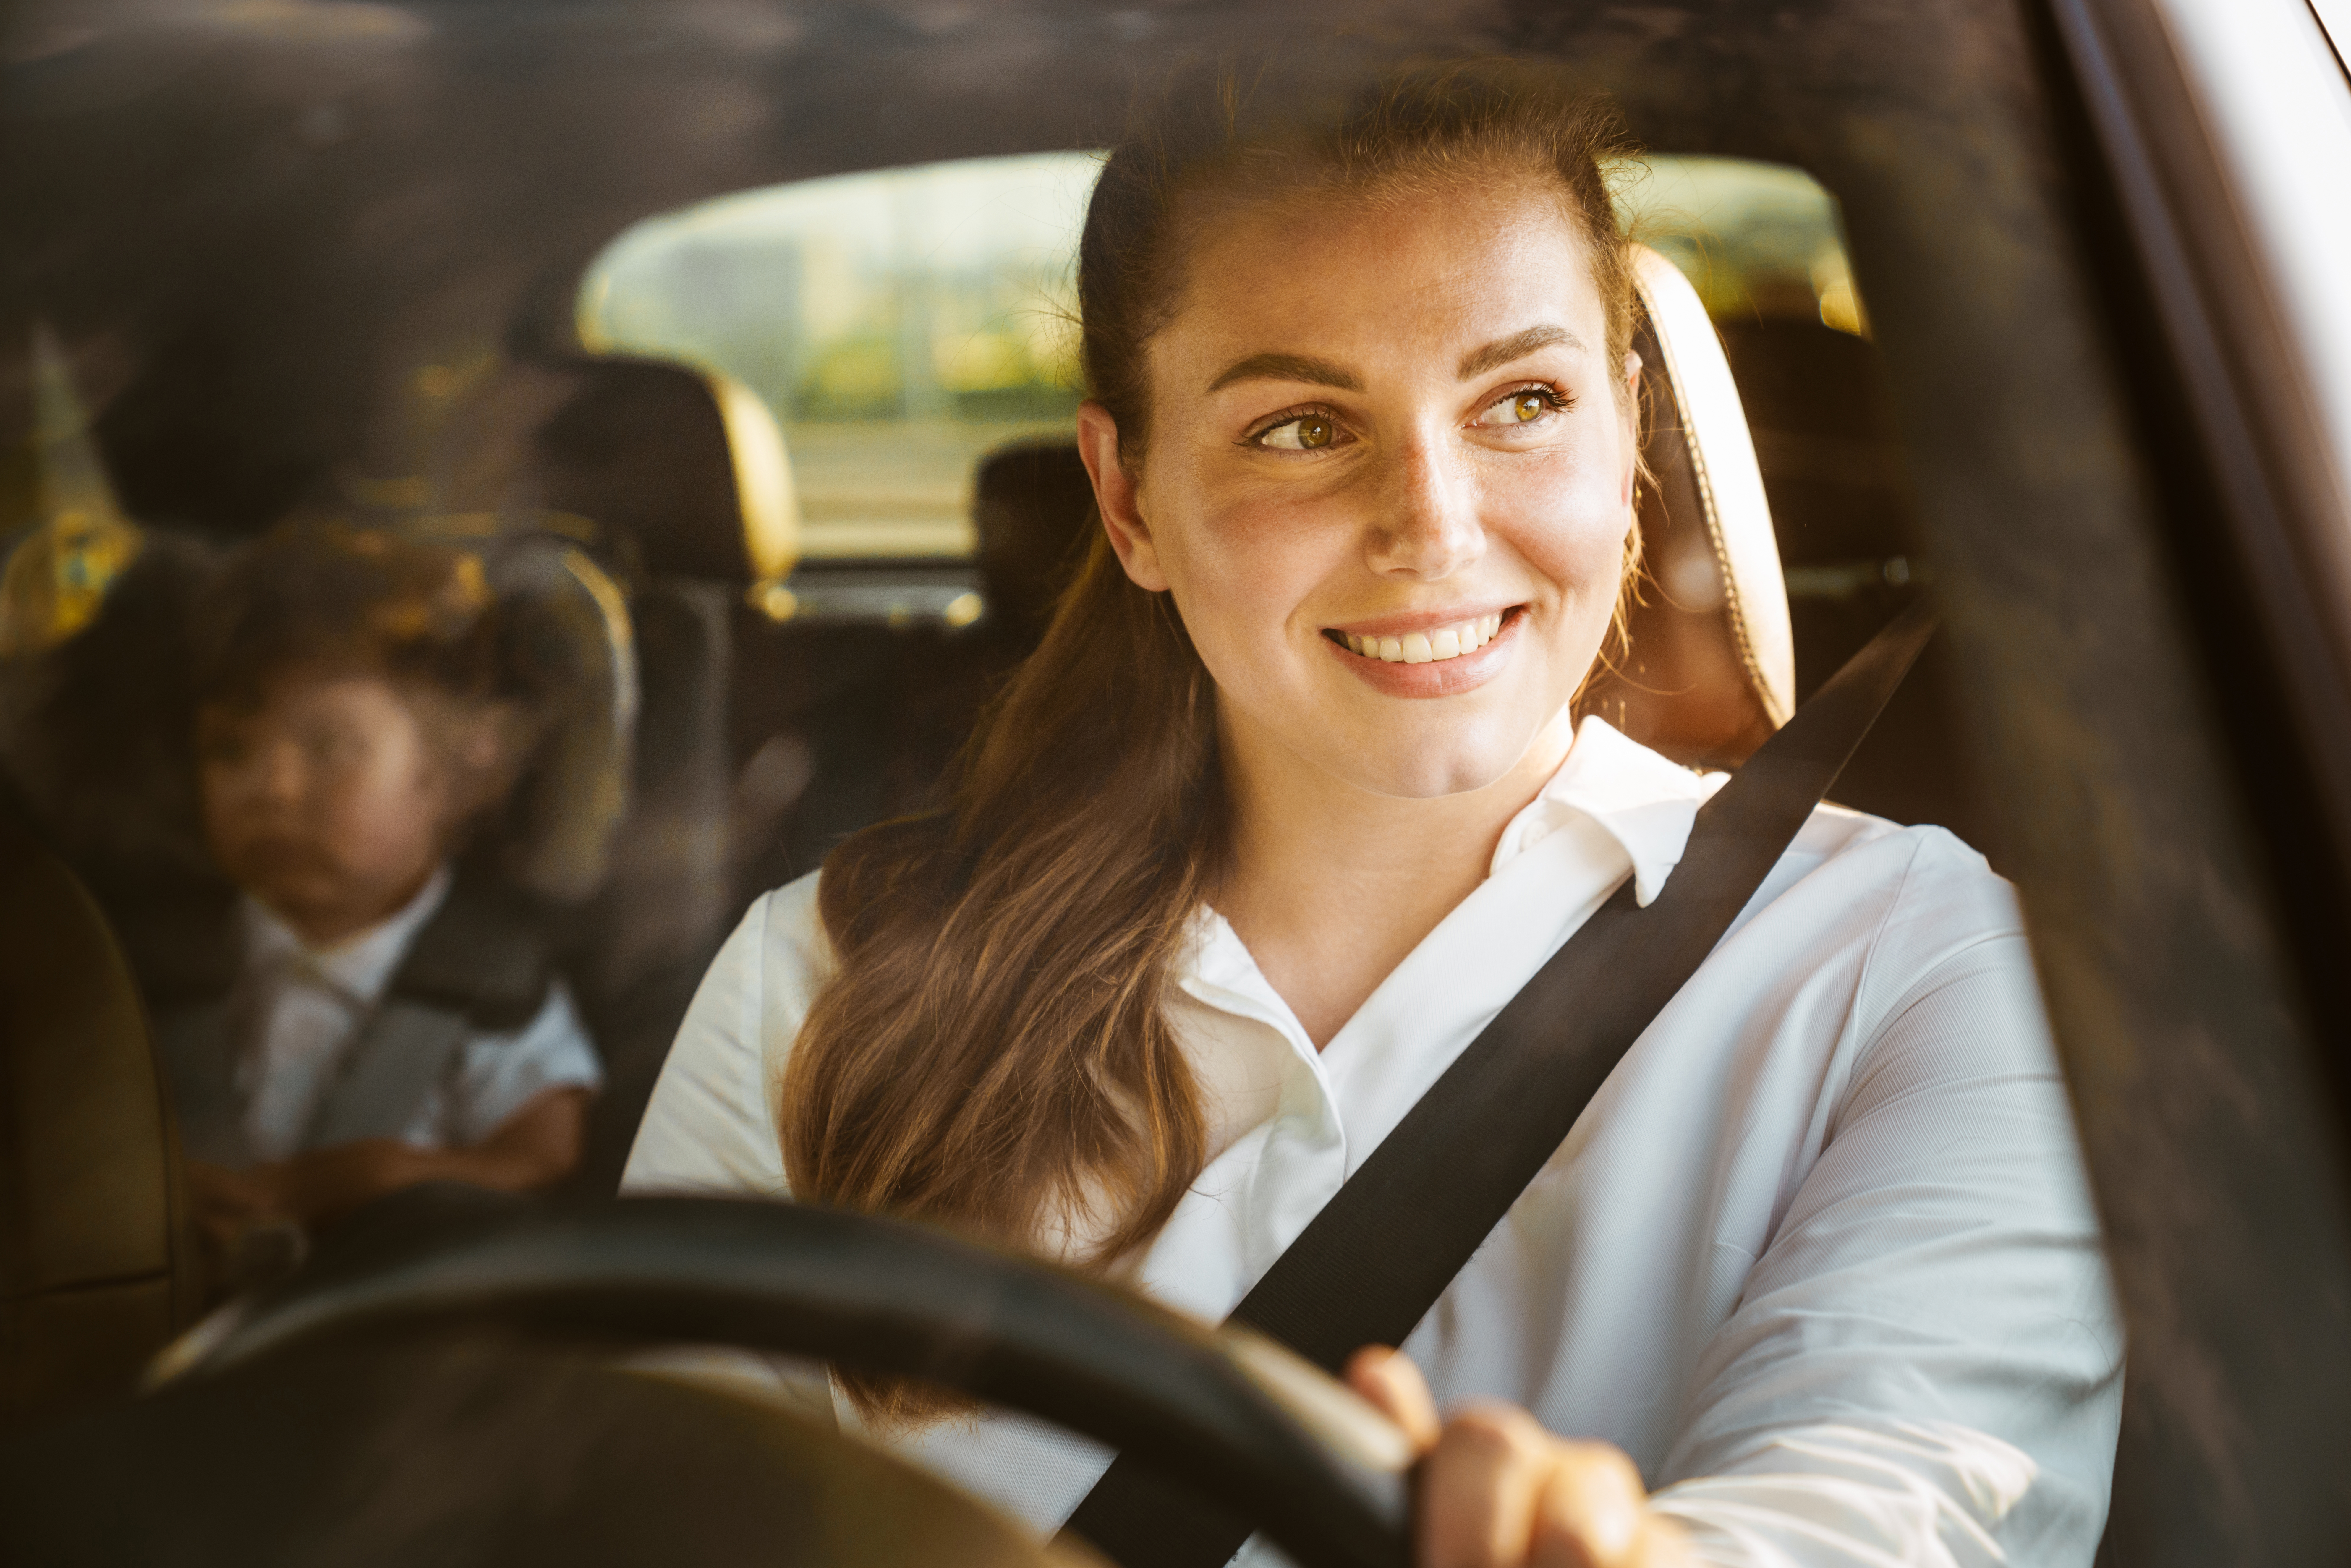 Young white woman driving car | Source: Shutterstock